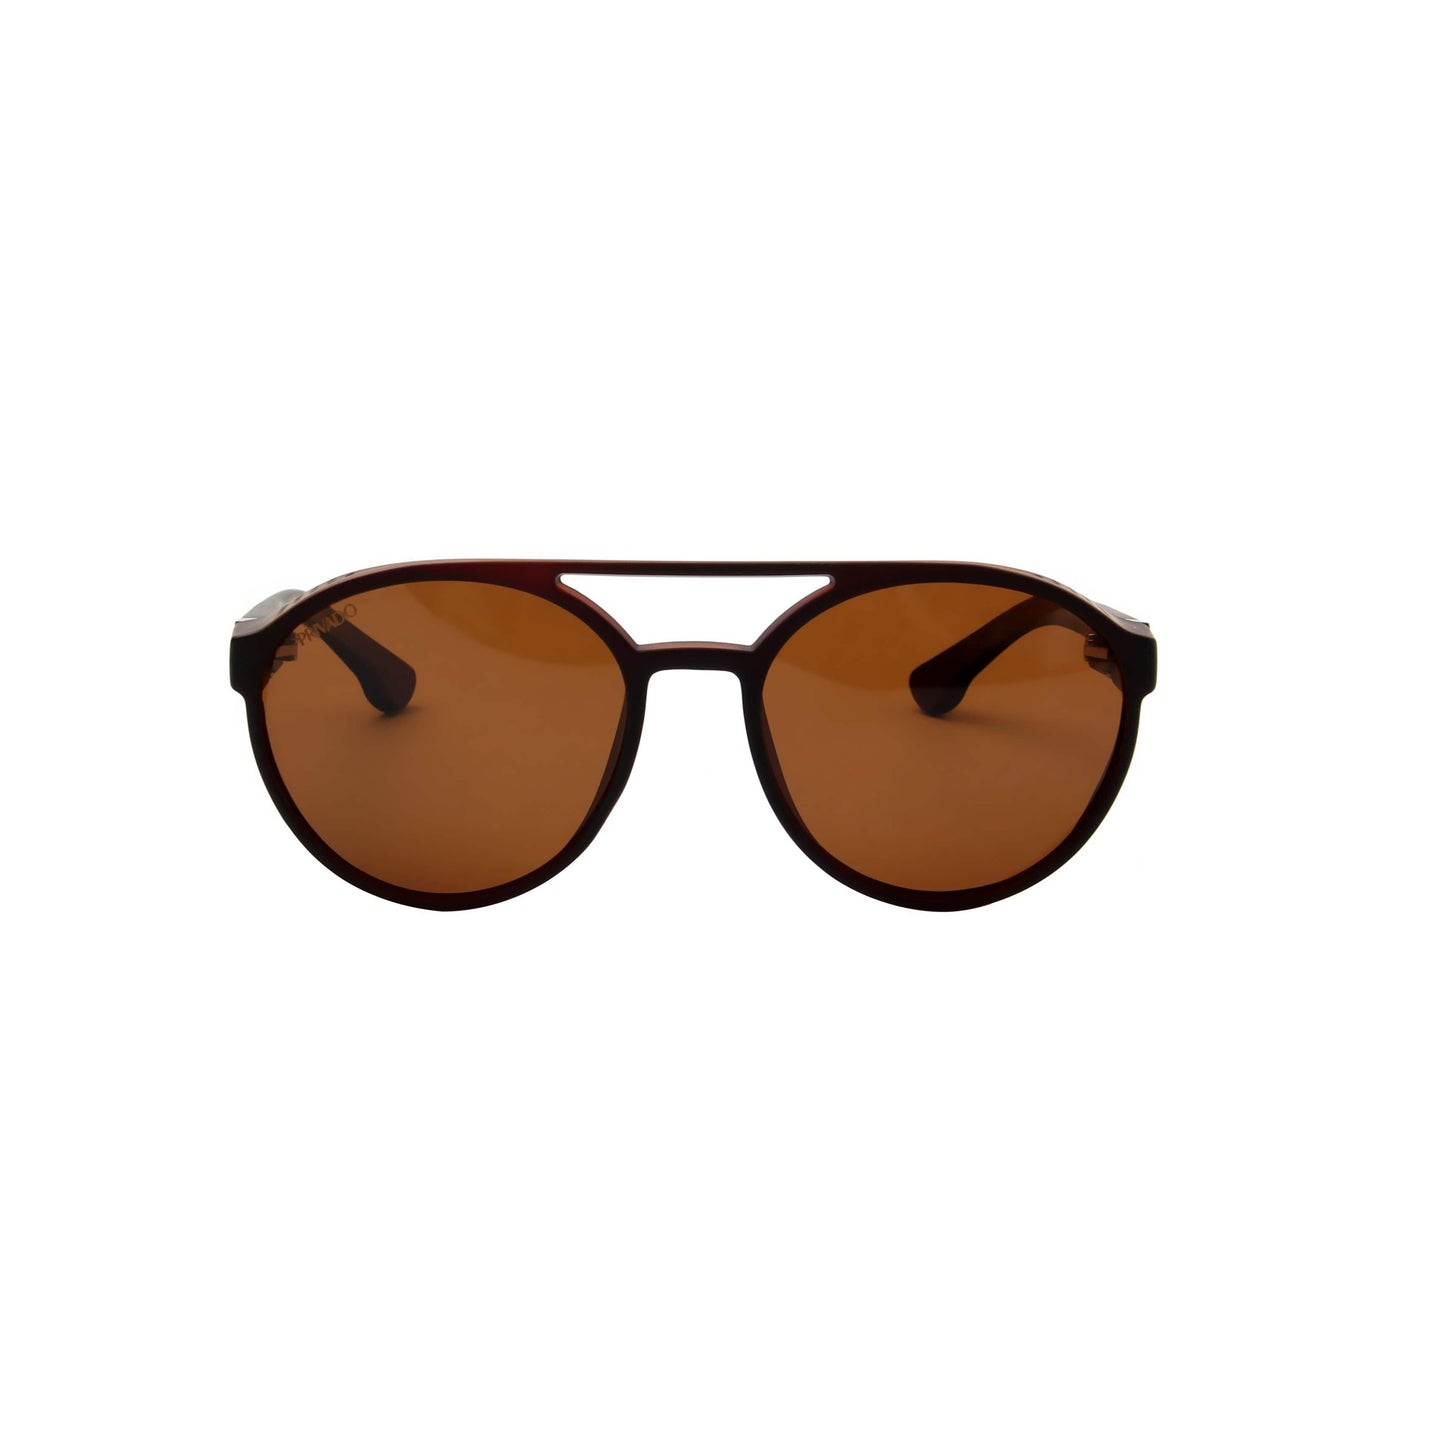 Privado Noctua matte brown vintage sunglasses,zinc and pc frame,brown 1.1TAC lens,UV400 protected with anti-reflective coating